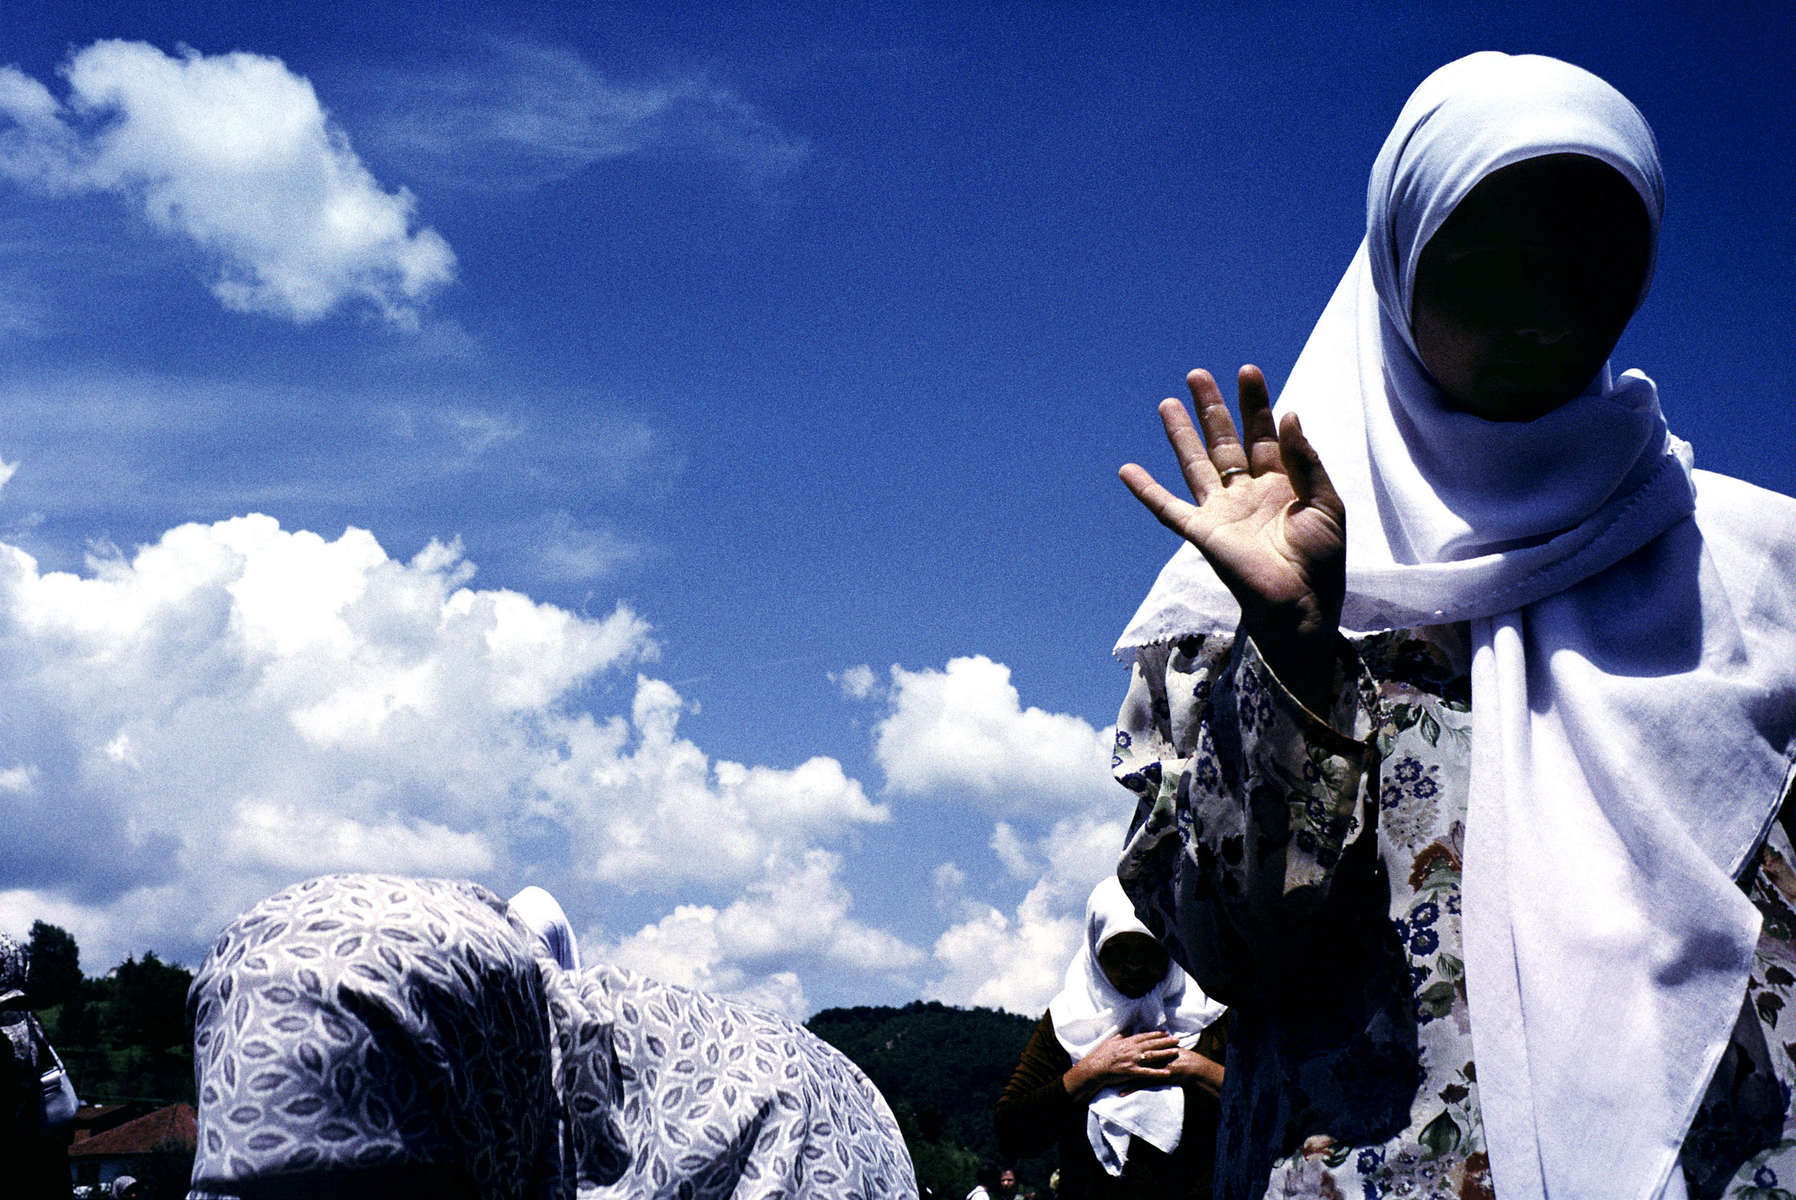 Muslim widows during the prayer for the dead offered at the groundbreaking of a memorial site for the 7,000 to 8,000 Muslim men and boys who were massacred by Bosnian Serb forces in 1995.